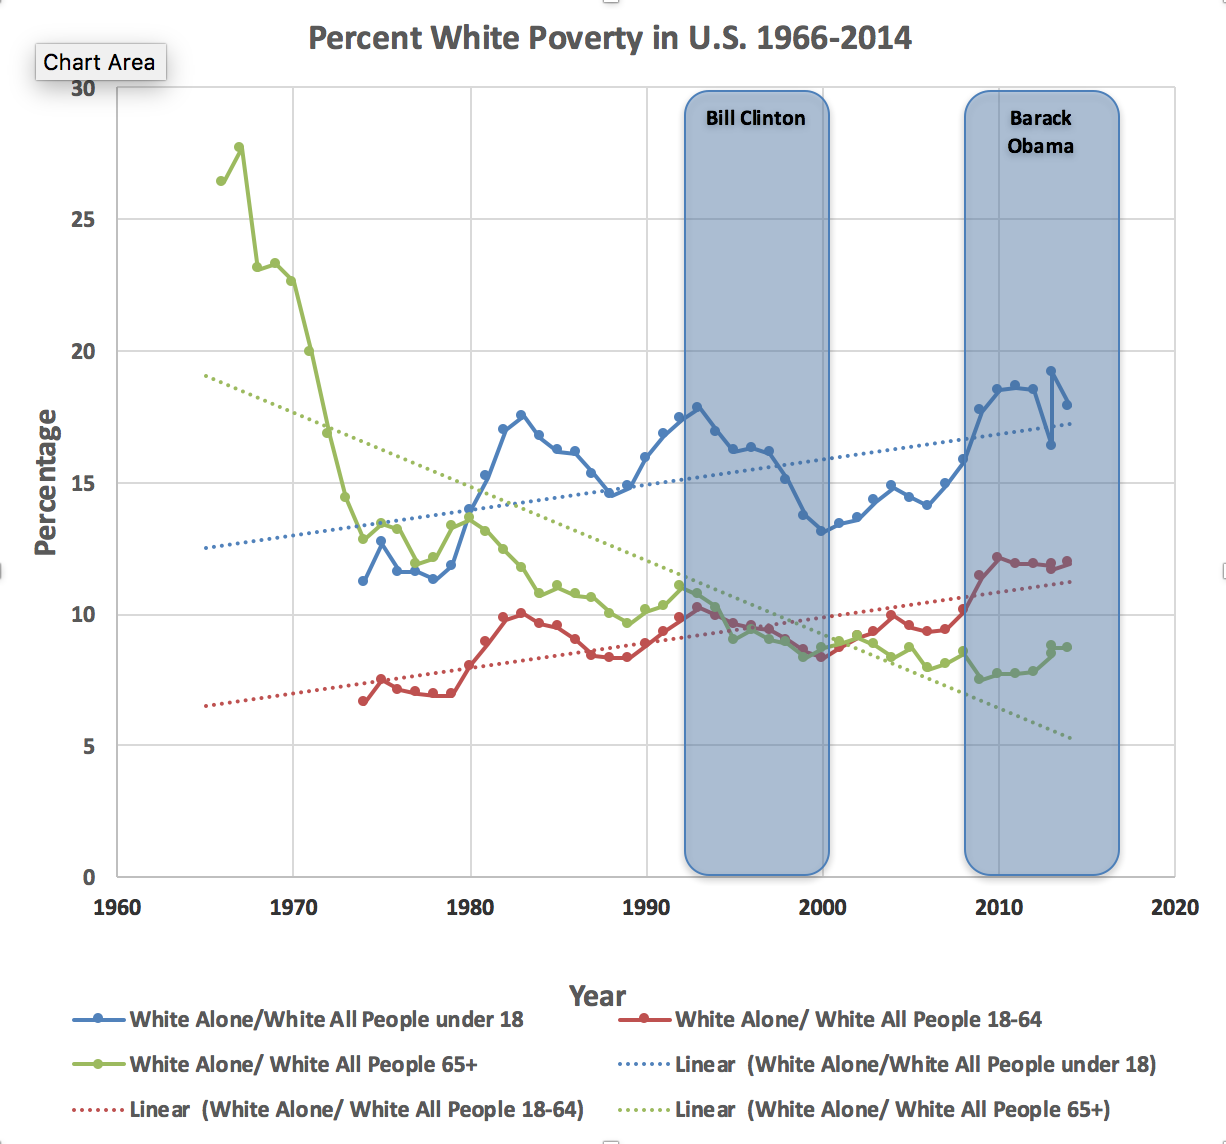 Source for Data: https://www.census.gov/data/tables/time-series/demo/income-poverty/historical-poverty-people.html (See Table 3: Poverty Status of People, by Age, Race, and Hispanic Origin